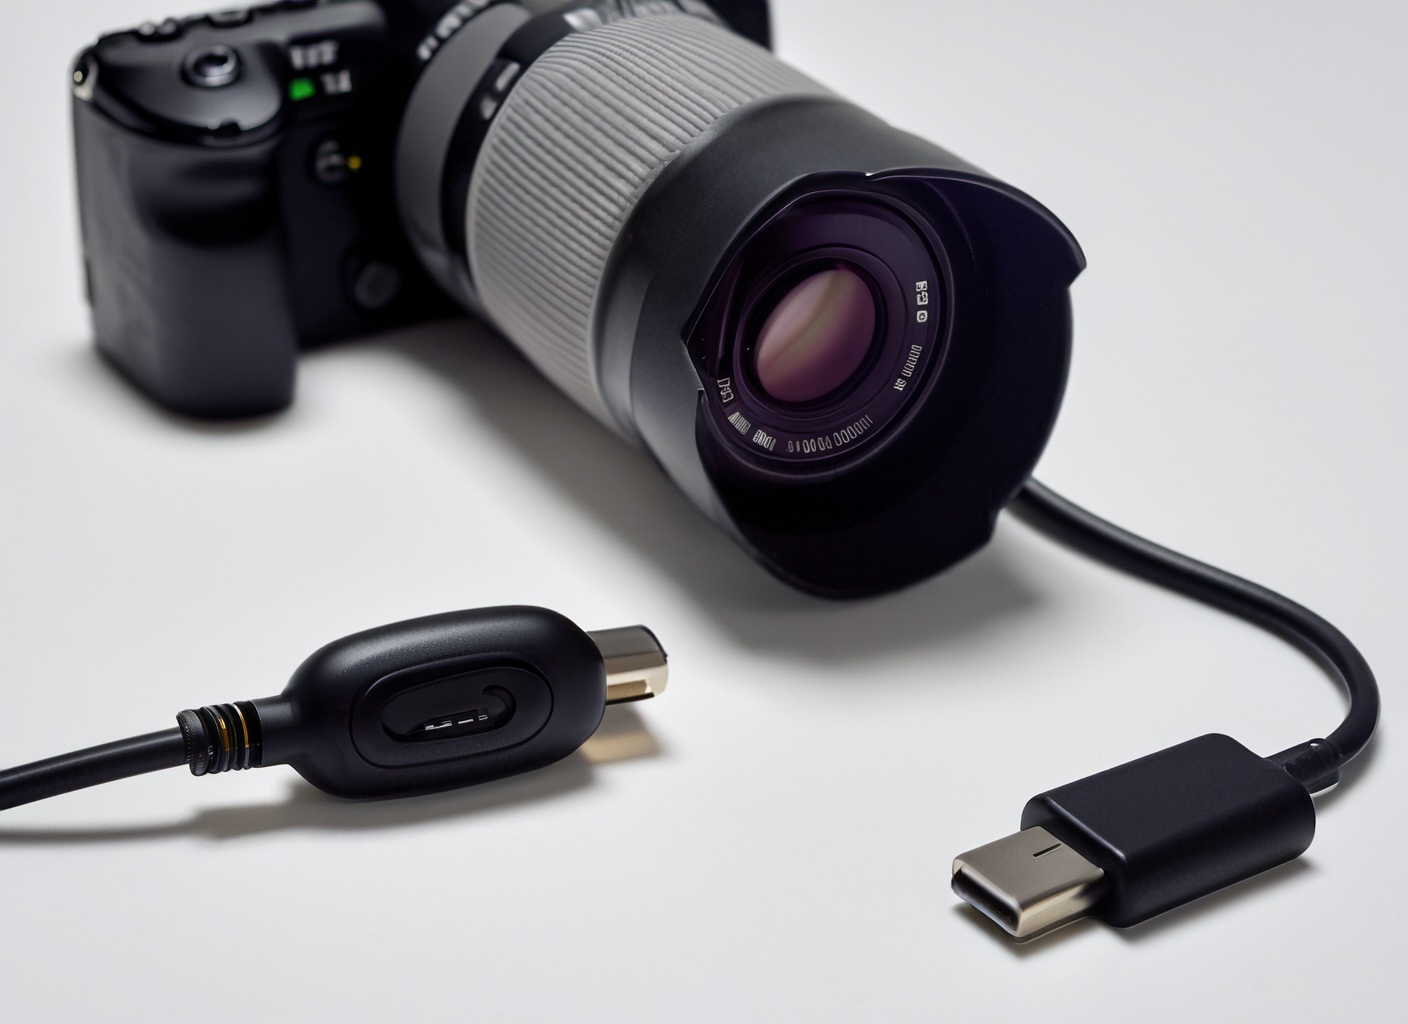 How To Charge A Lumix Camera Without The Charger?